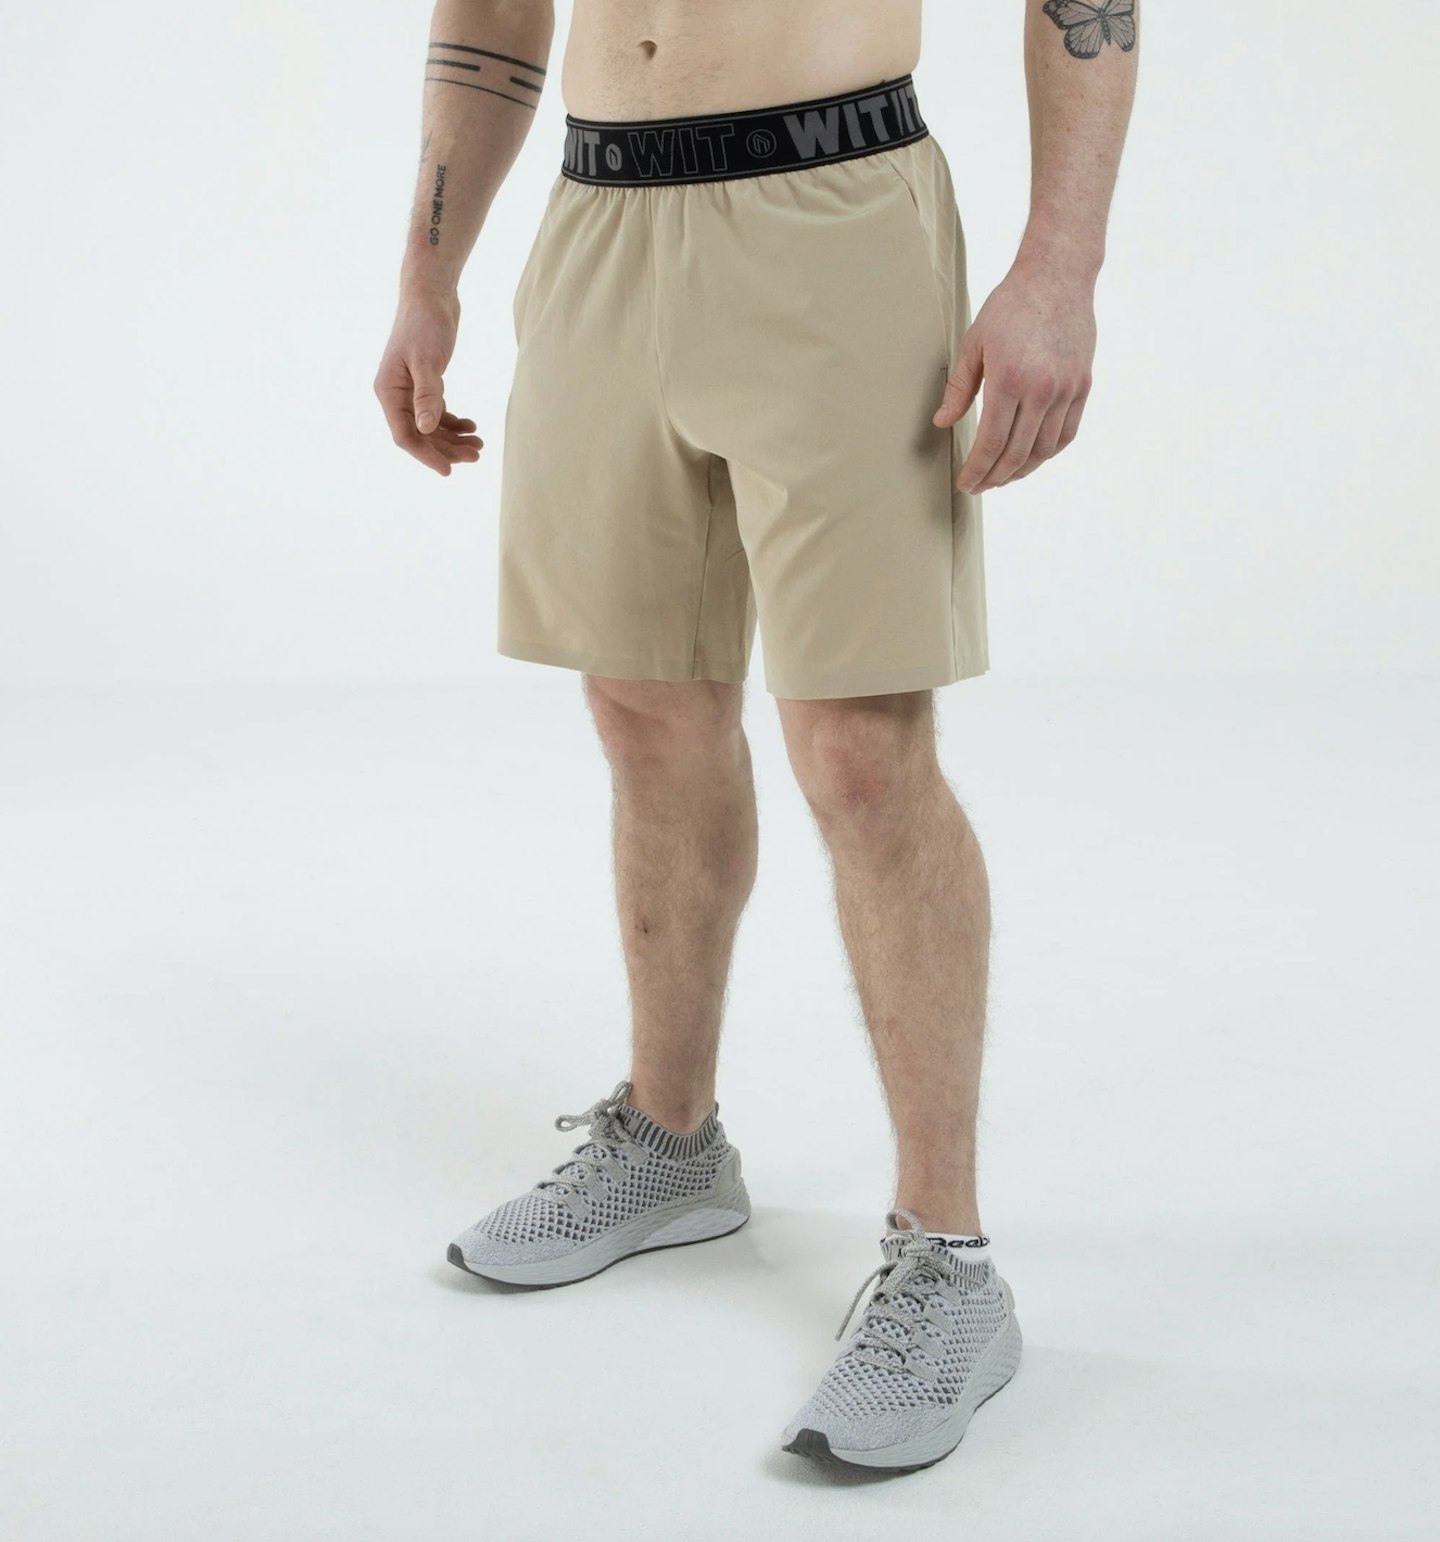 WIT Lightweight Woven Shorts In Cream